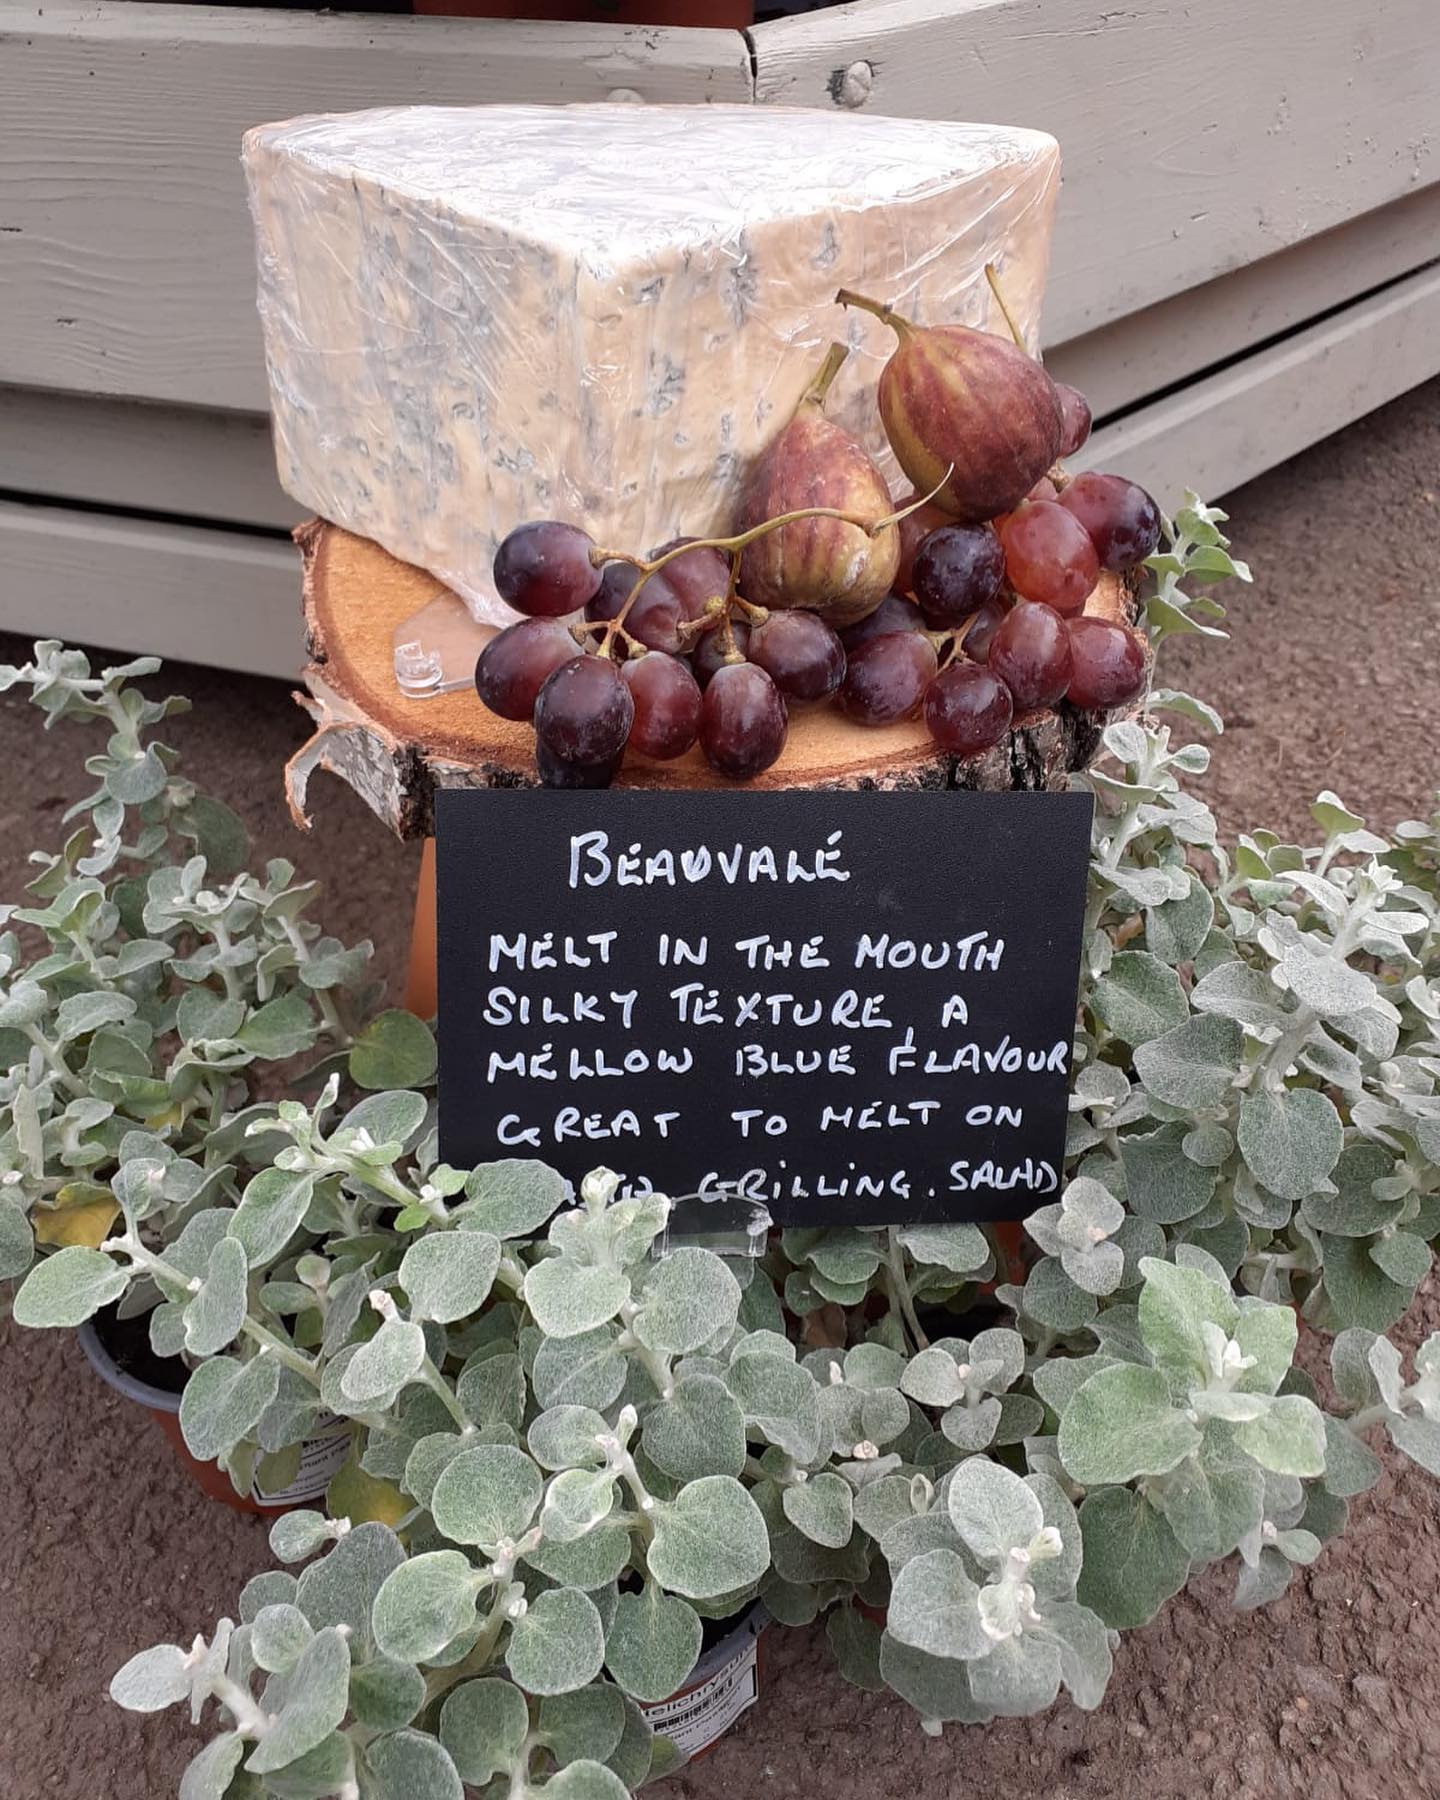 Perfect for the Fathers Day table?  We have 25% off the gorgeous #Beauvale cheese at the cheese counter in our Denbies shop. While stock last. 

#englishcheese #farmshop